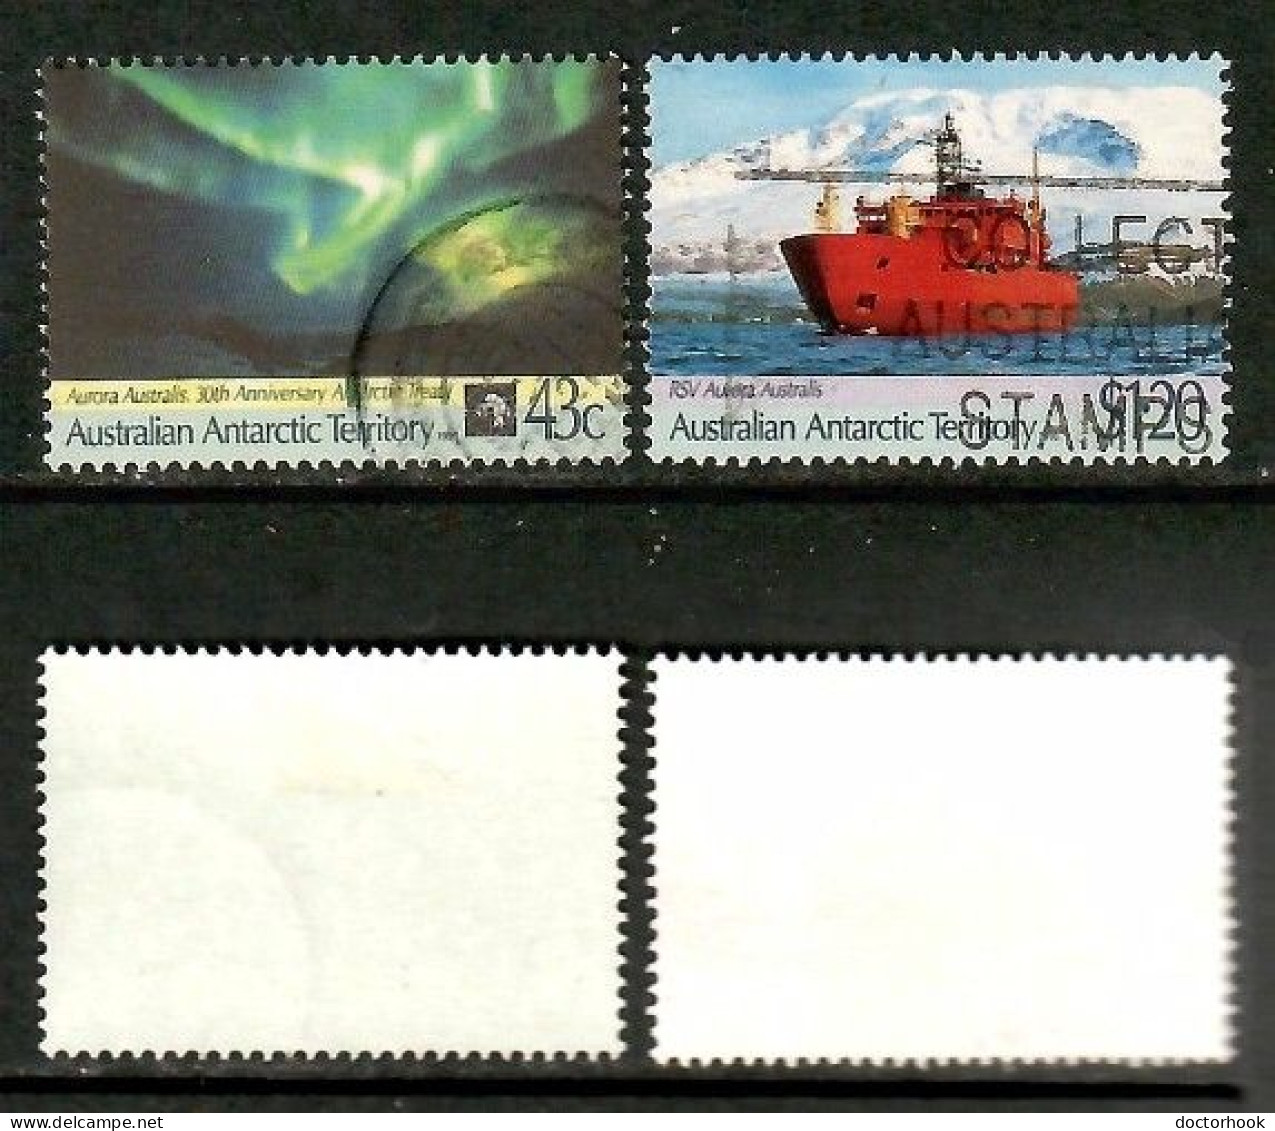 AUSTRALIAN ANTARCTIC TERRITORY   Scott # L 81-2 USED (CONDITION AS PER SCAN) (Stamp Scan # 1008-7) - Used Stamps